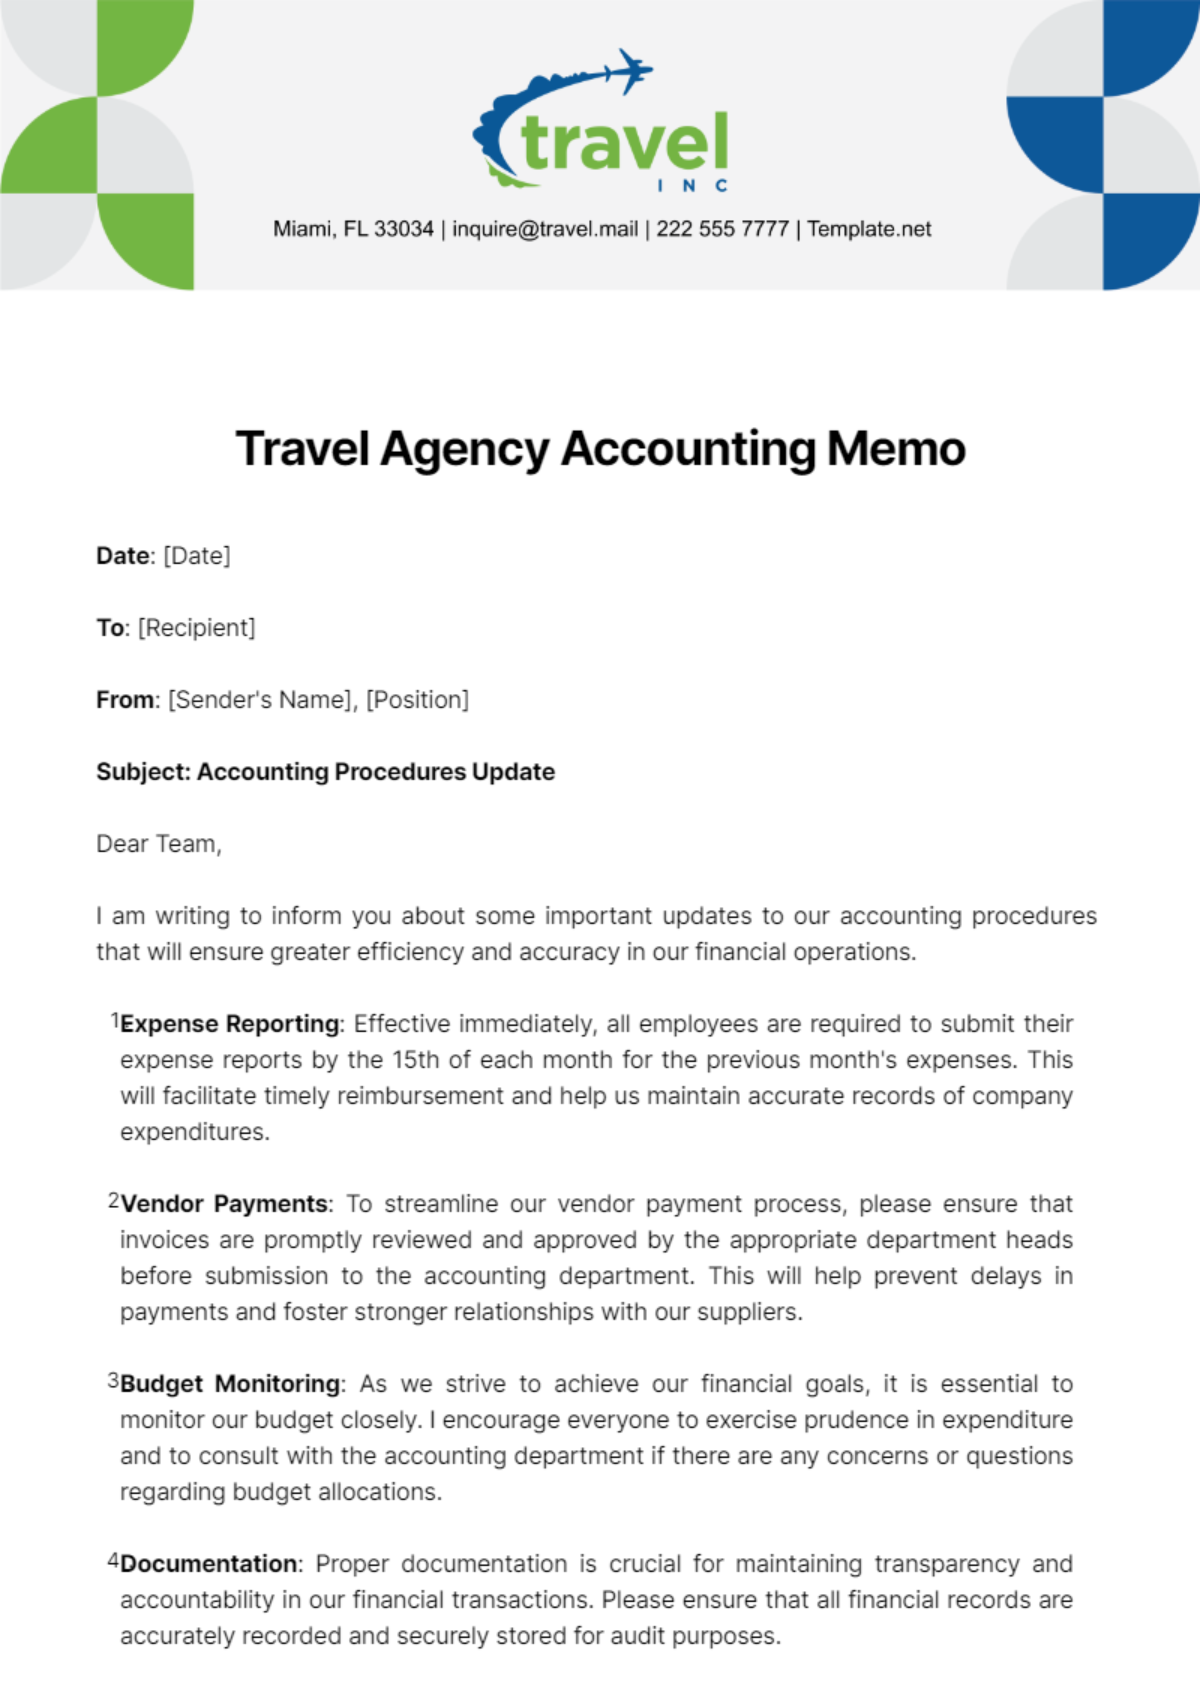 Free Travel Agency Accounting Memo Template